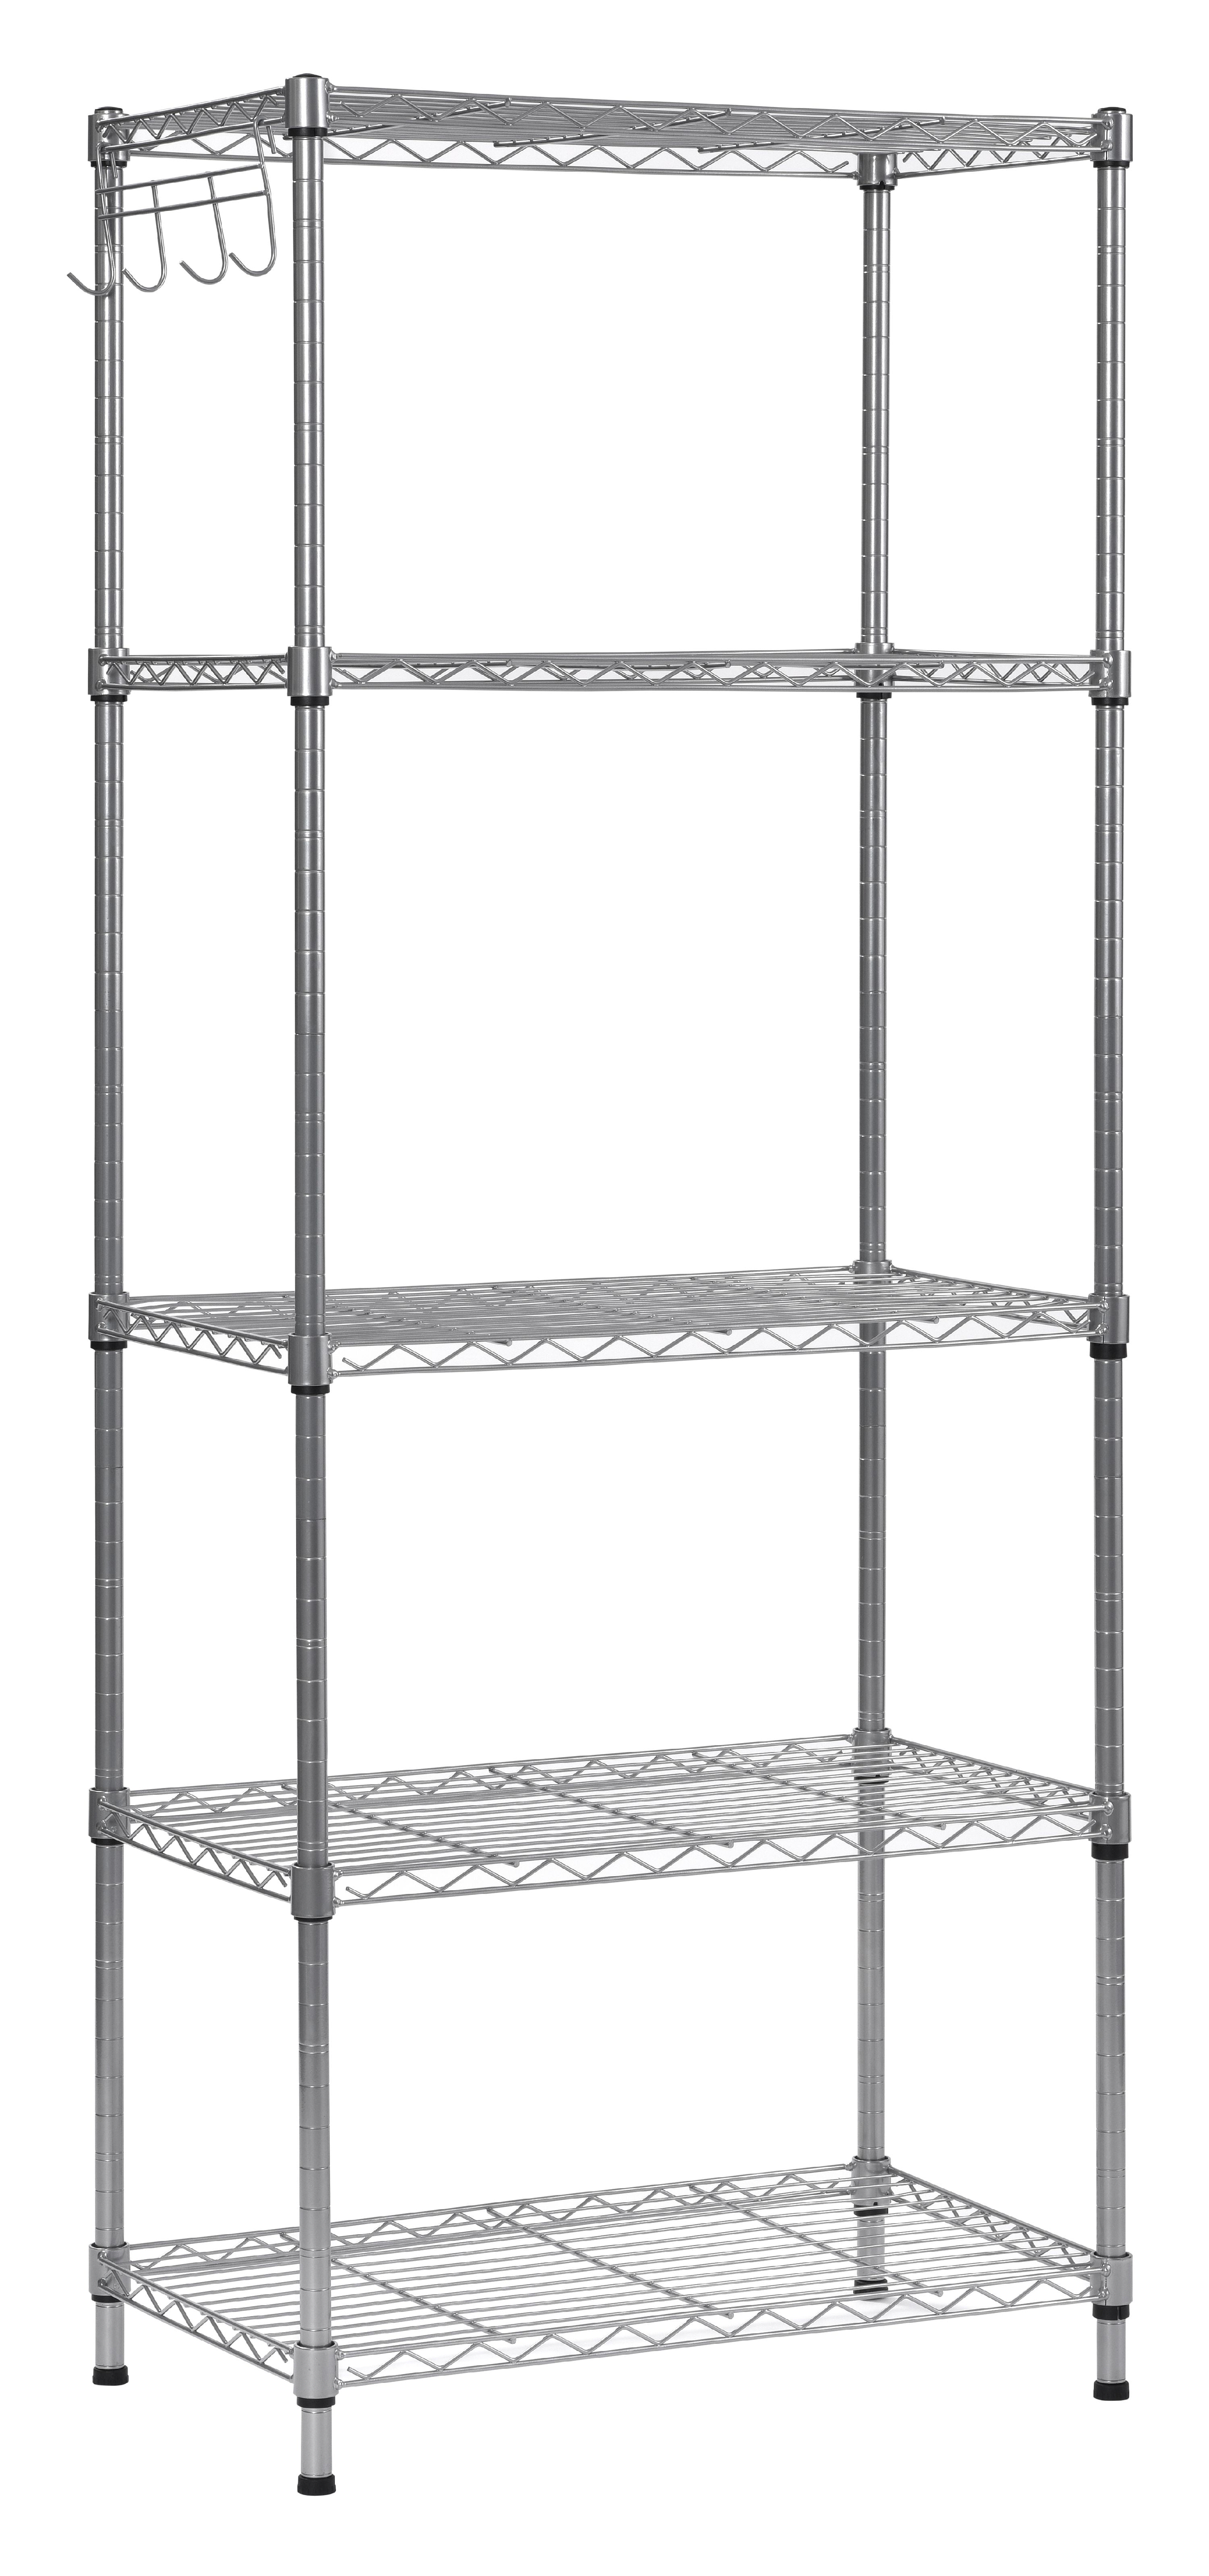 Muscle Rack 5 Tier Wire Shelving Unit, Adjustable Wire Shelving